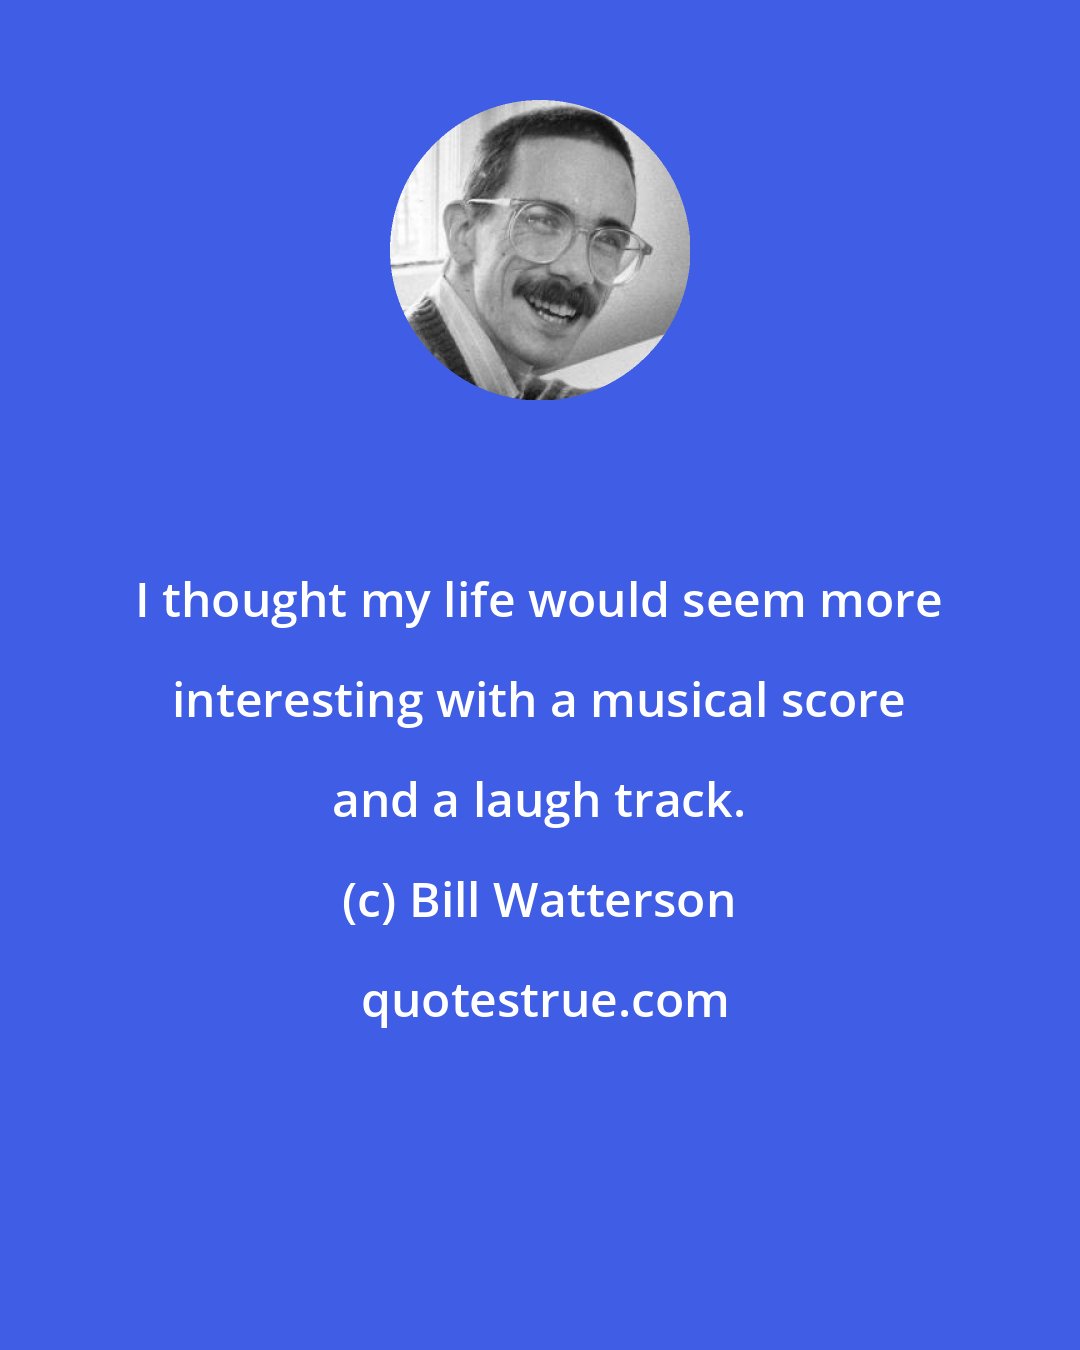 Bill Watterson: I thought my life would seem more interesting with a musical score and a laugh track.